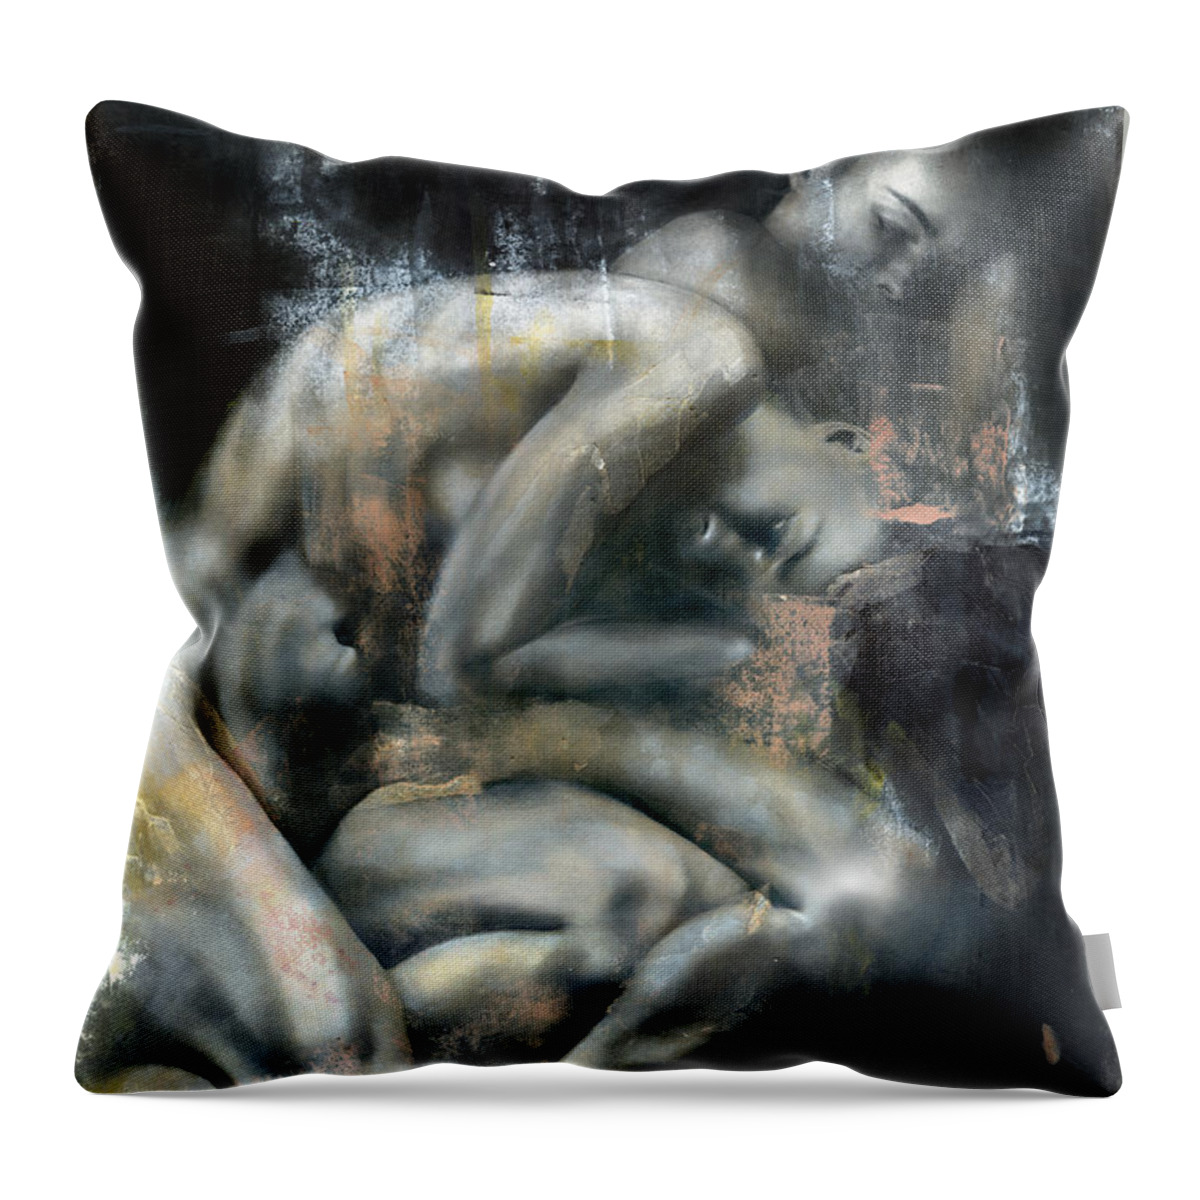 Figurative Throw Pillow featuring the painting Equinox by Patricia Ariel